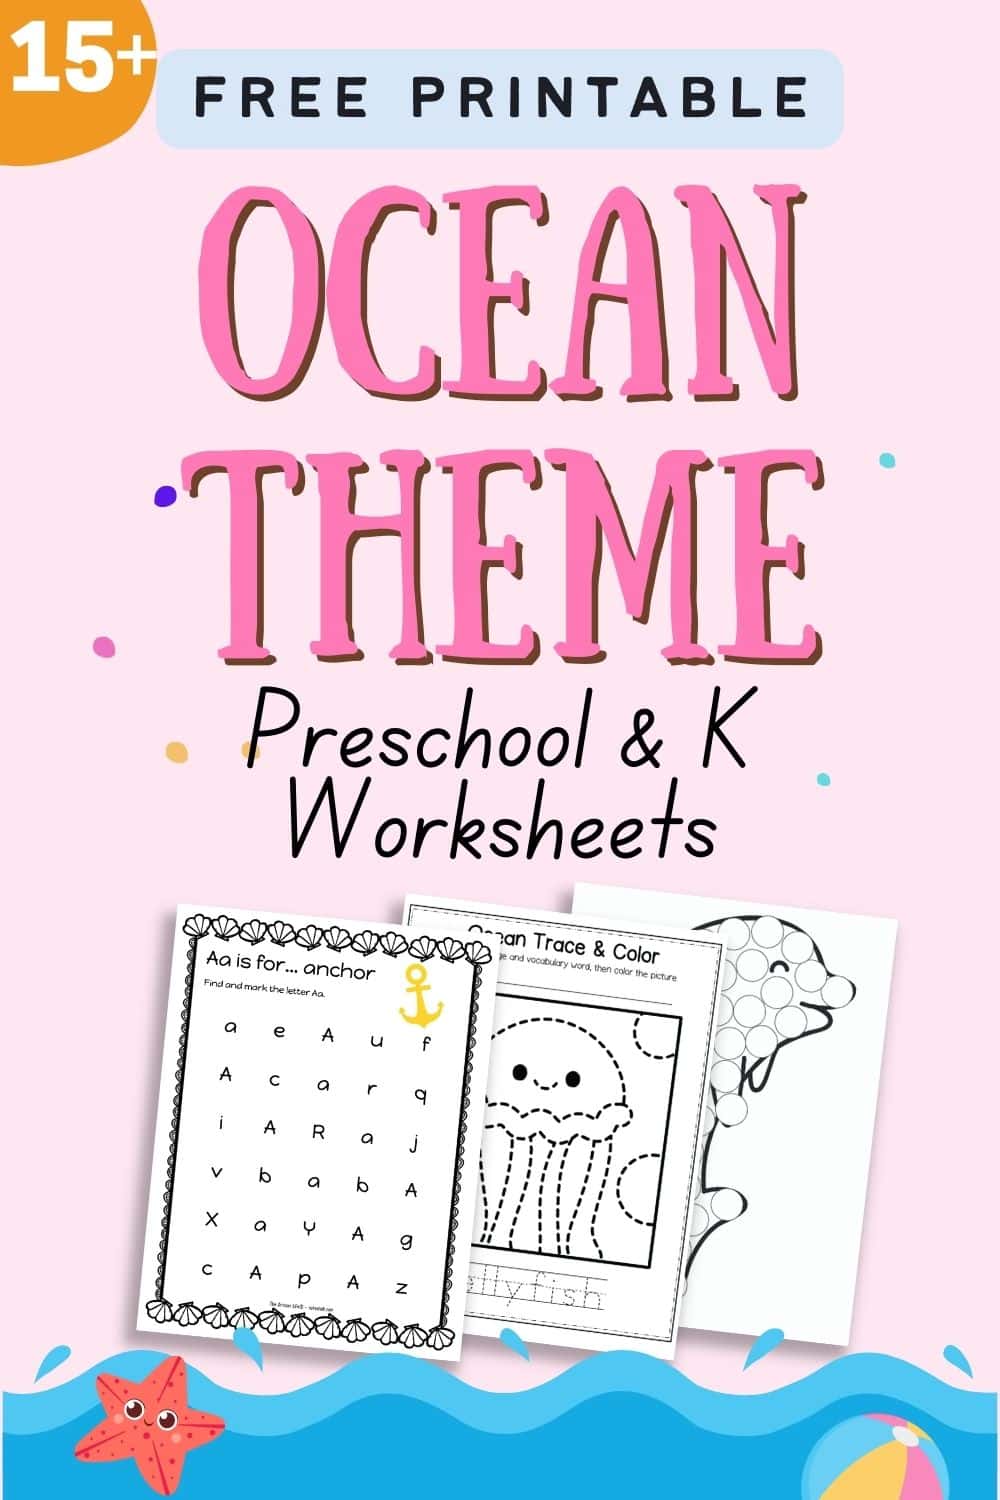 Text "15+ free printable ocean theme preschool and K printables" with a preview of three sheets of ocean themed worksheets.